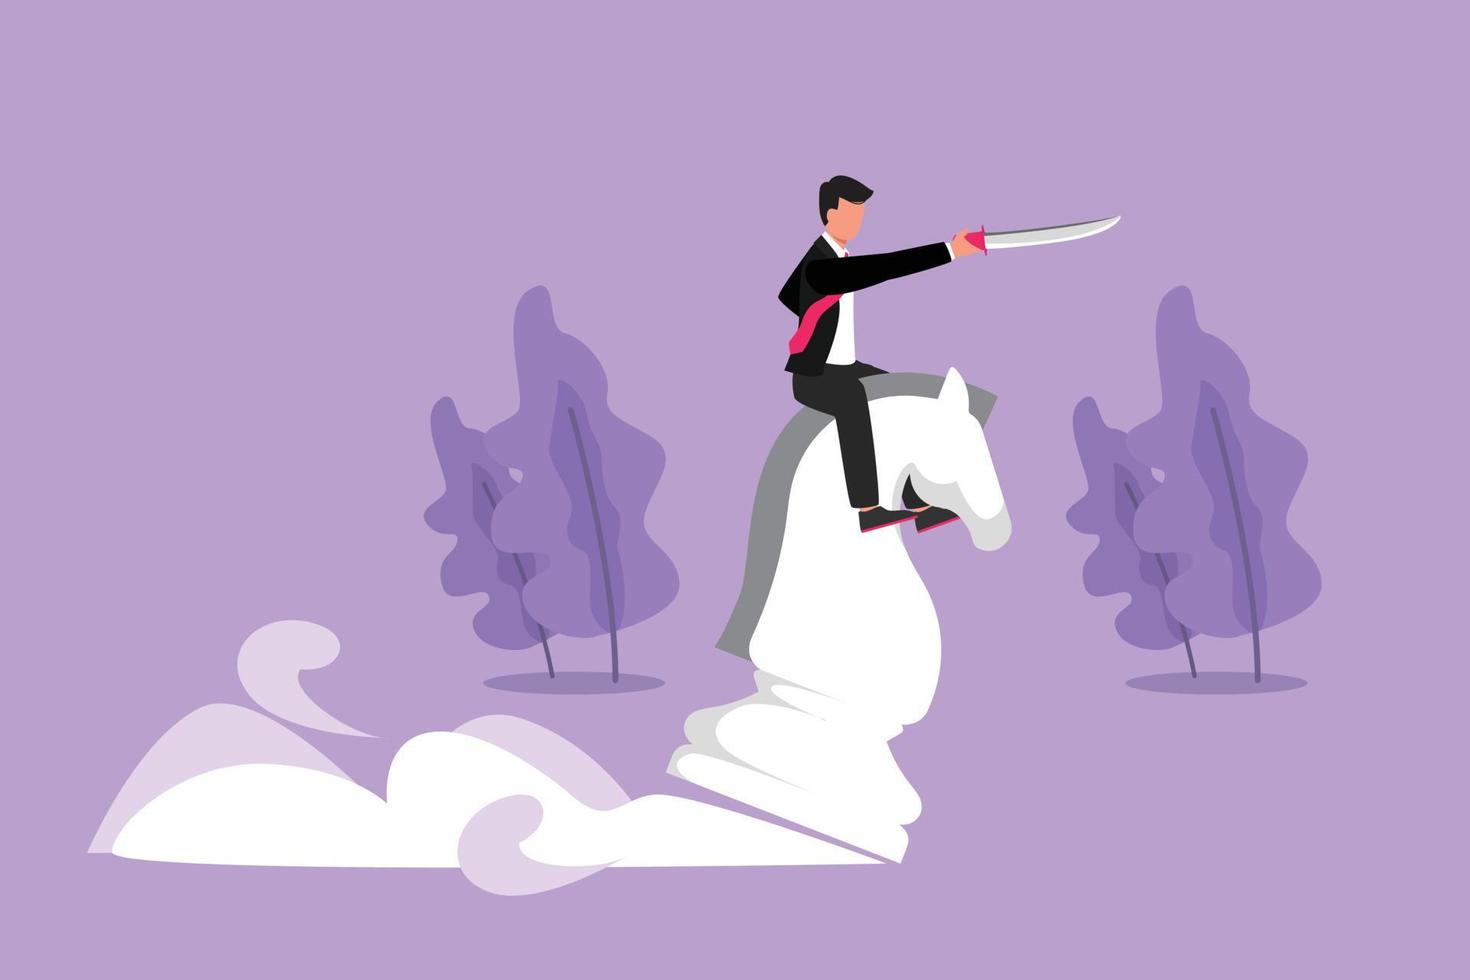 Graphic flat design drawing competitive businessman riding big chess horse knight with sword. Idea, business strategy, winning competition, achievement goal concept. Cartoon style vector illustration